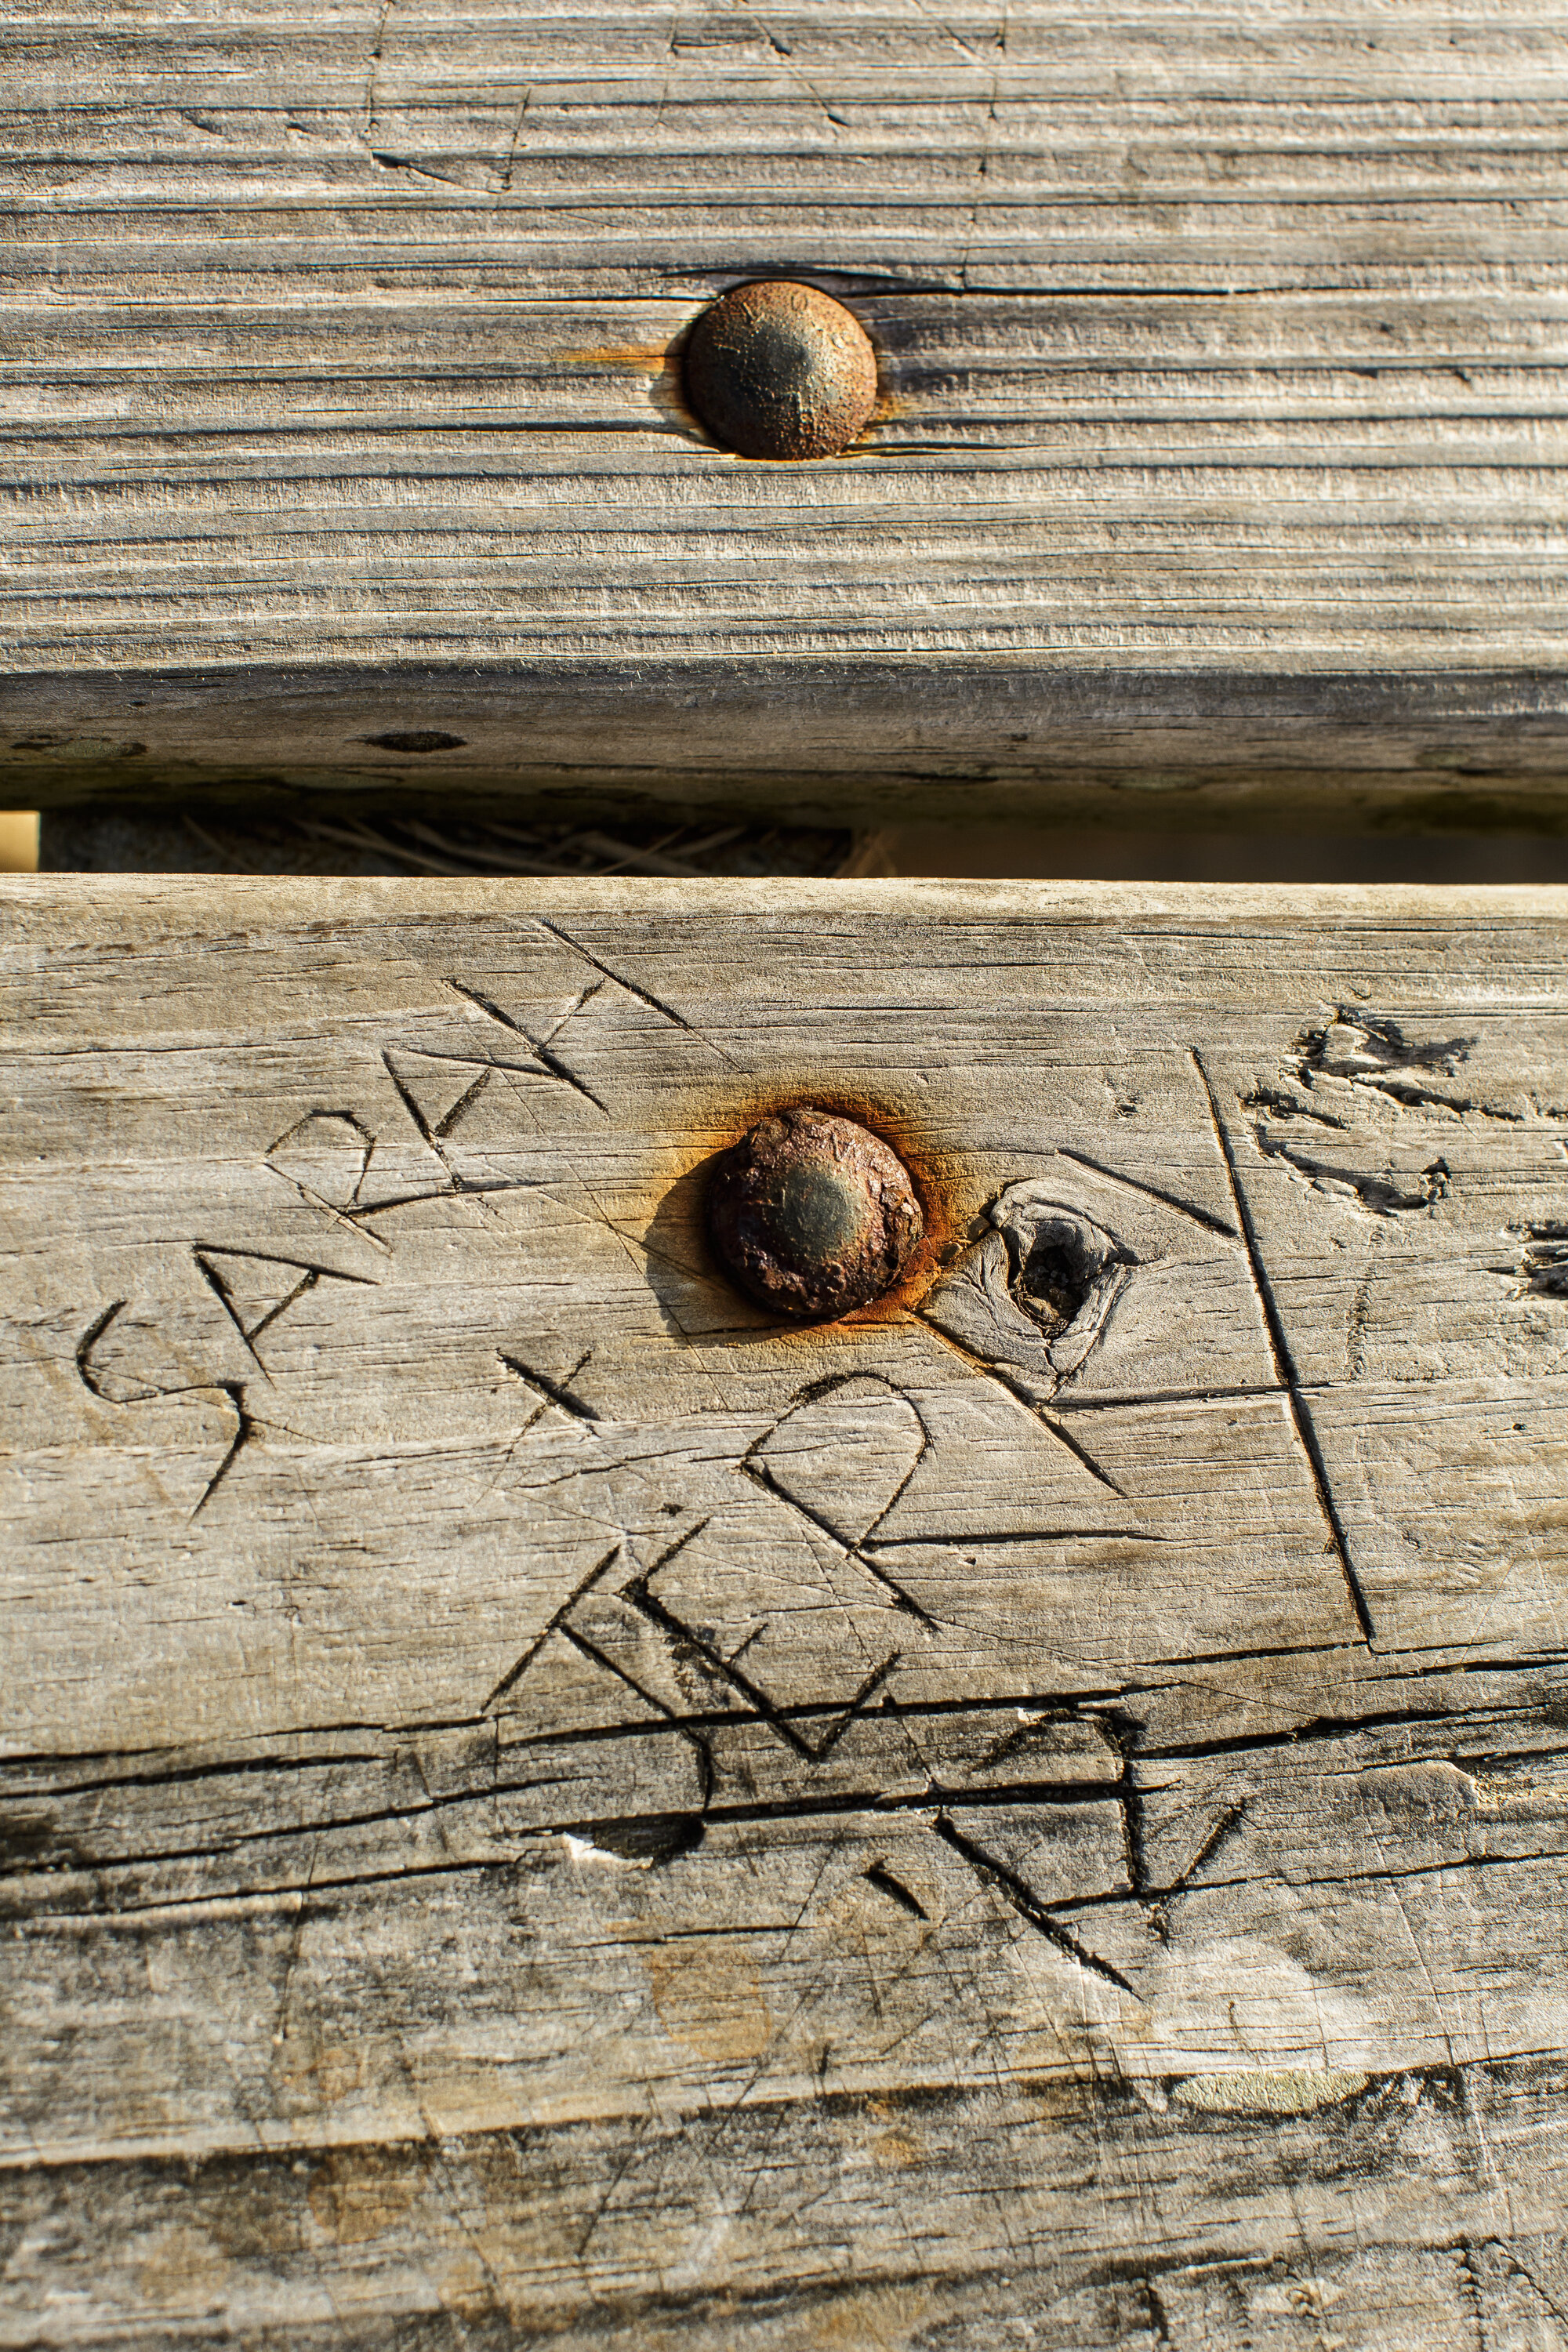  Generations of tourists are drawn to the warm, shallow water at the Salvo Day Use Area, and many leave their mark behind on the picnic benches at the edge of the Pamlico Sound. 